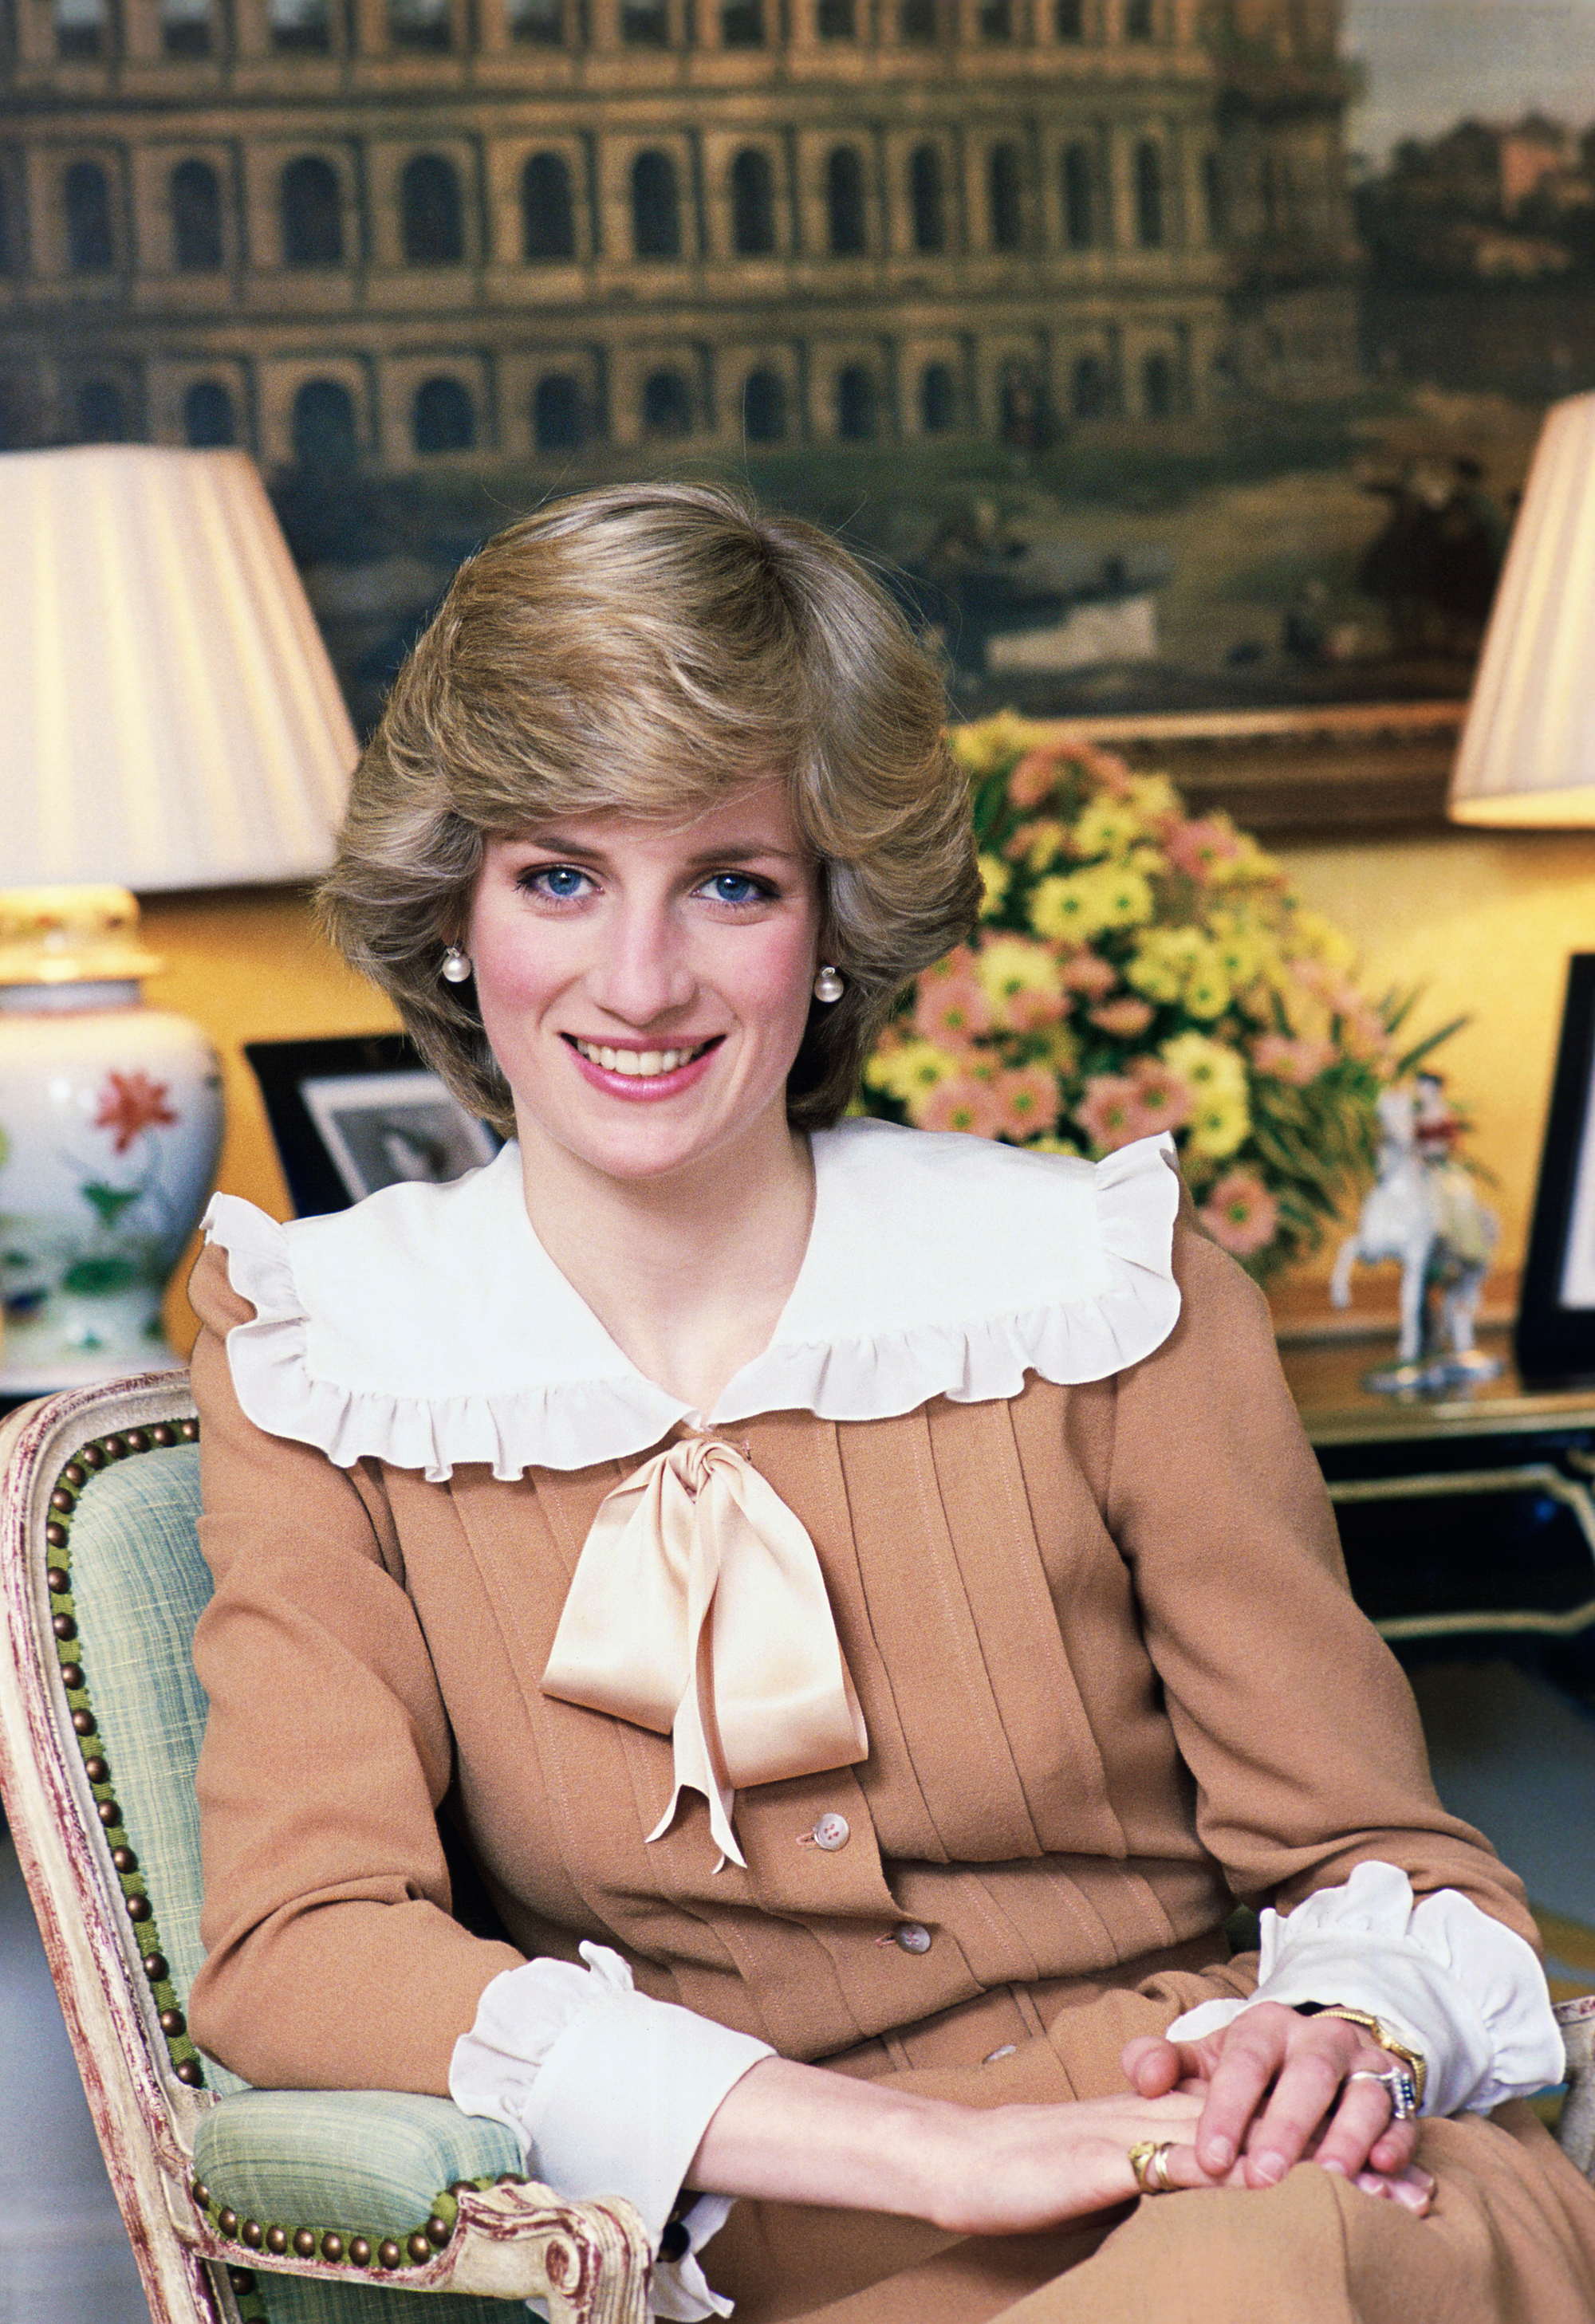 Princess Diana Hairstyle Evolution Feathered Shags Sleek Pixie Cuts and  More  Vogue India